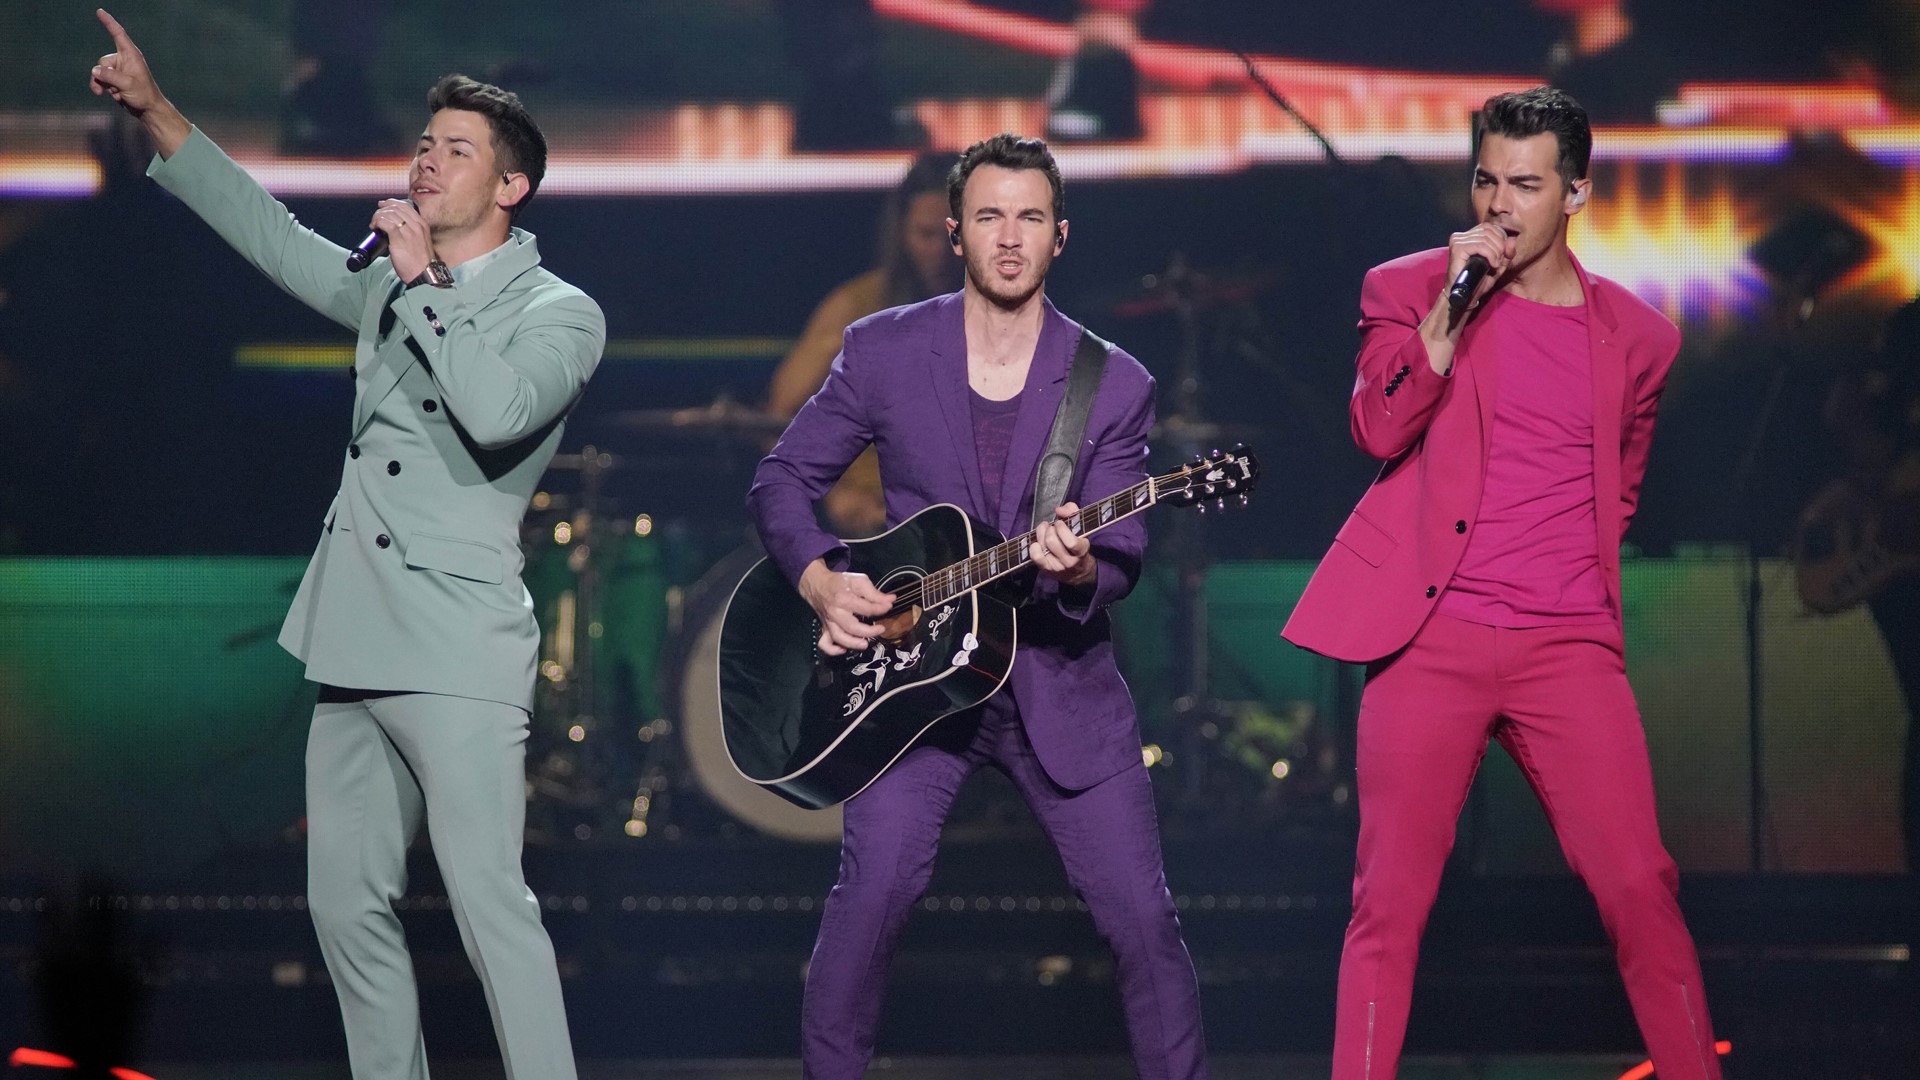 The Jonas Brothers are scheduled to perform at Ruoff Music Center in Noblesville Thursday, Sept. 9 beginning at 6 p.m. ET.